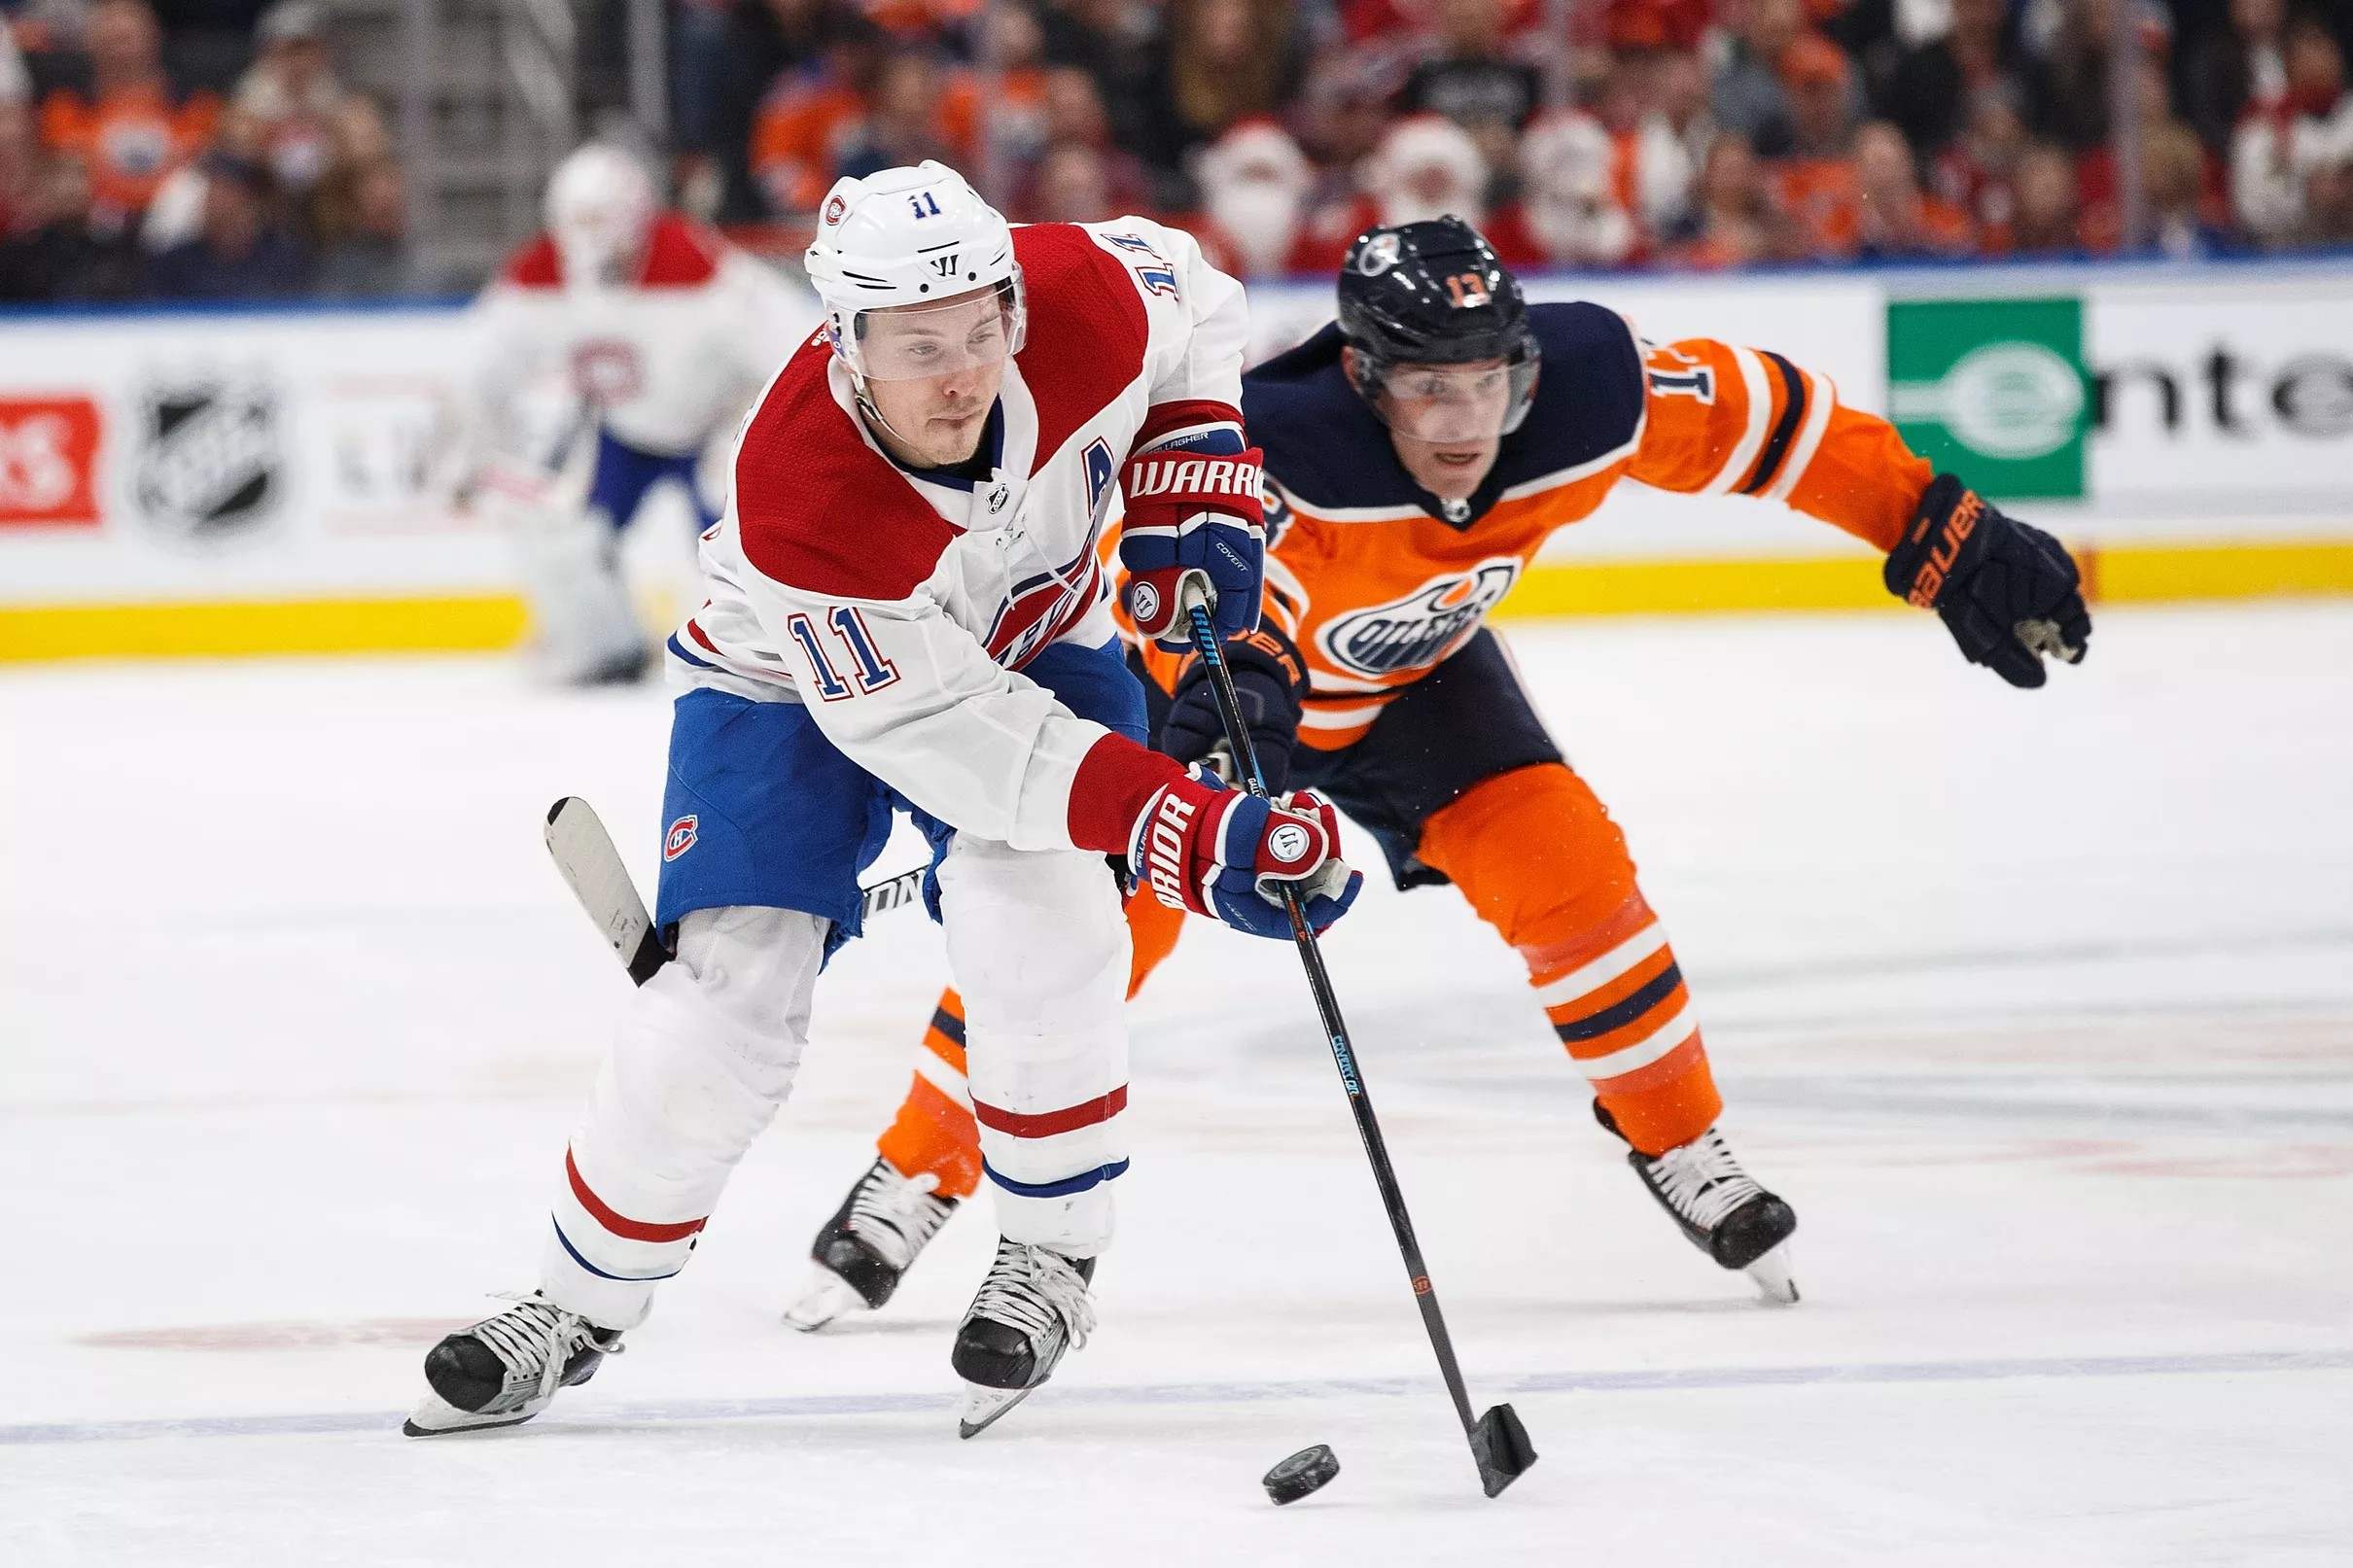 Canadiens Oilers Game preview, start time, Tale of the Tape, and how